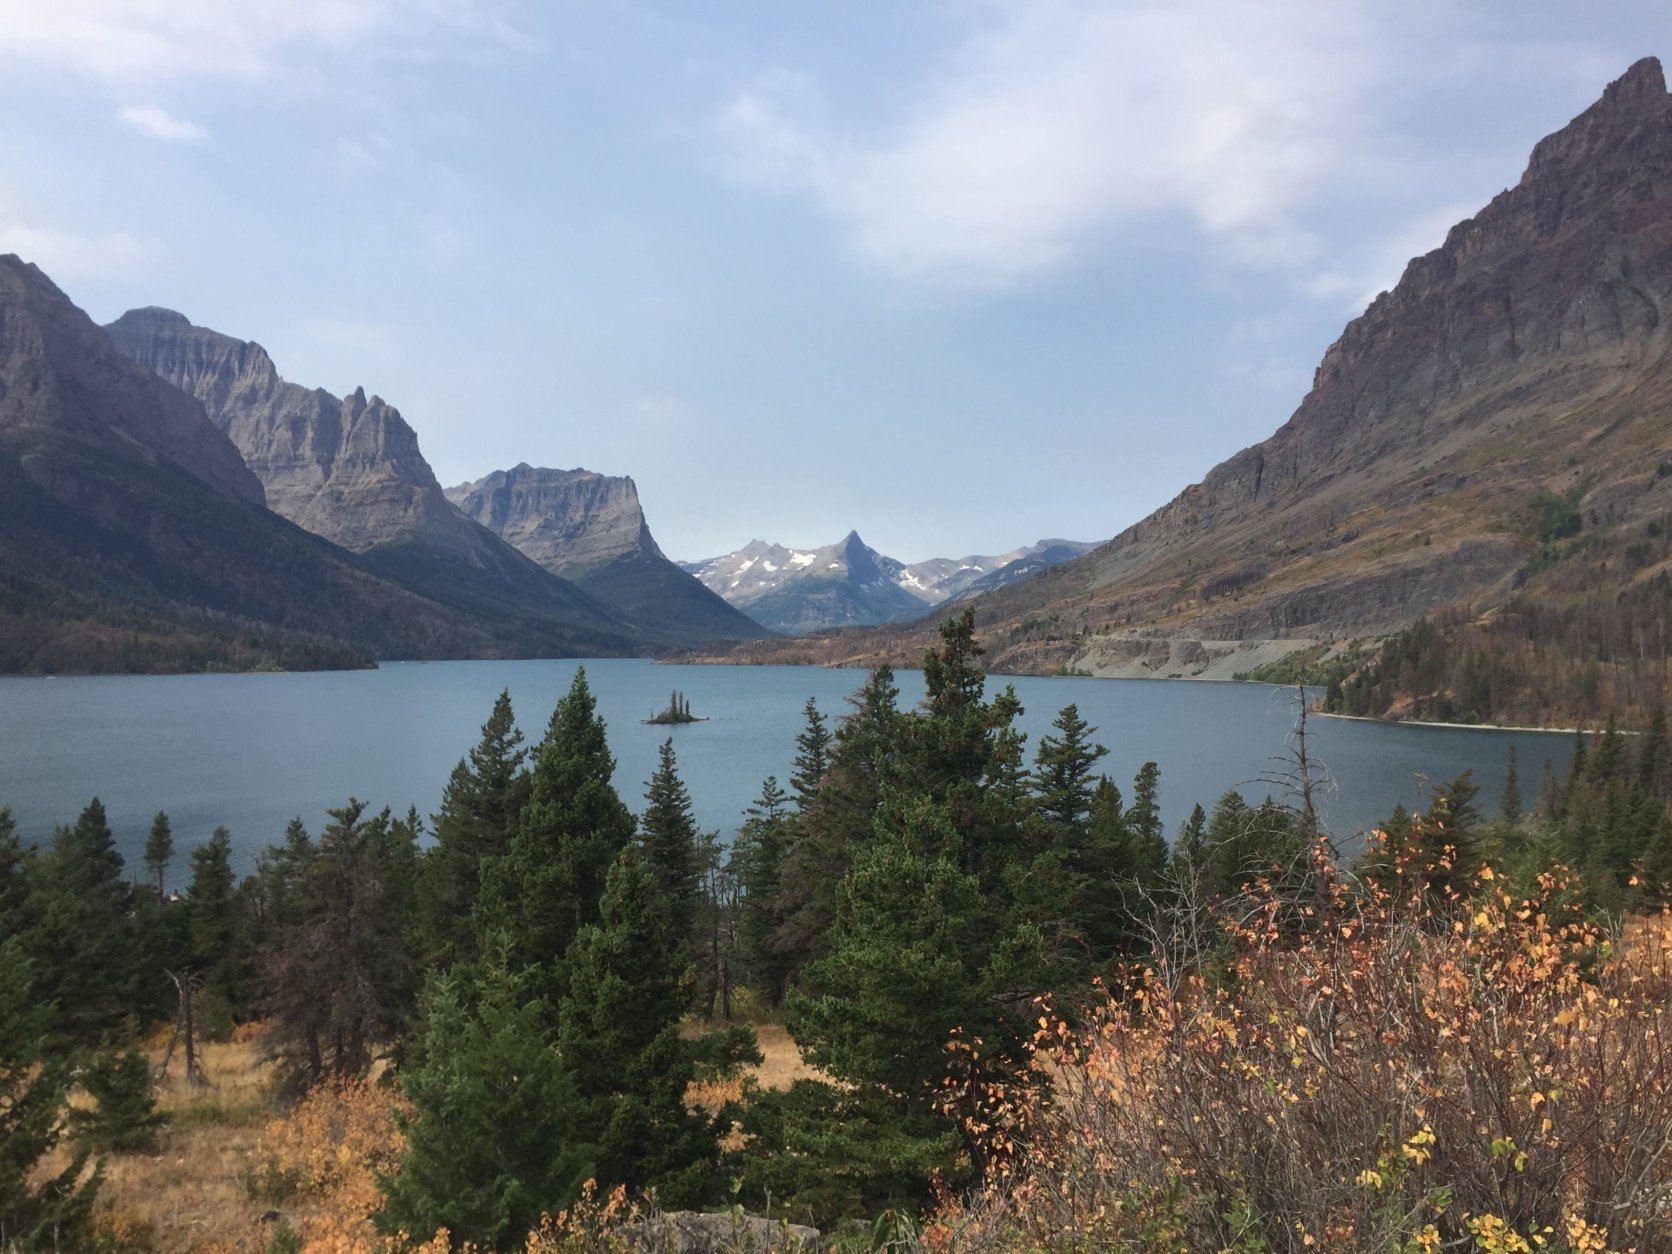 This Sept. 4, 2017 photo shows a view of Glacier National Park in Montana from the park's famous Going-to-the-Sun Road. (AP Photo/Beth J. Harpaz)